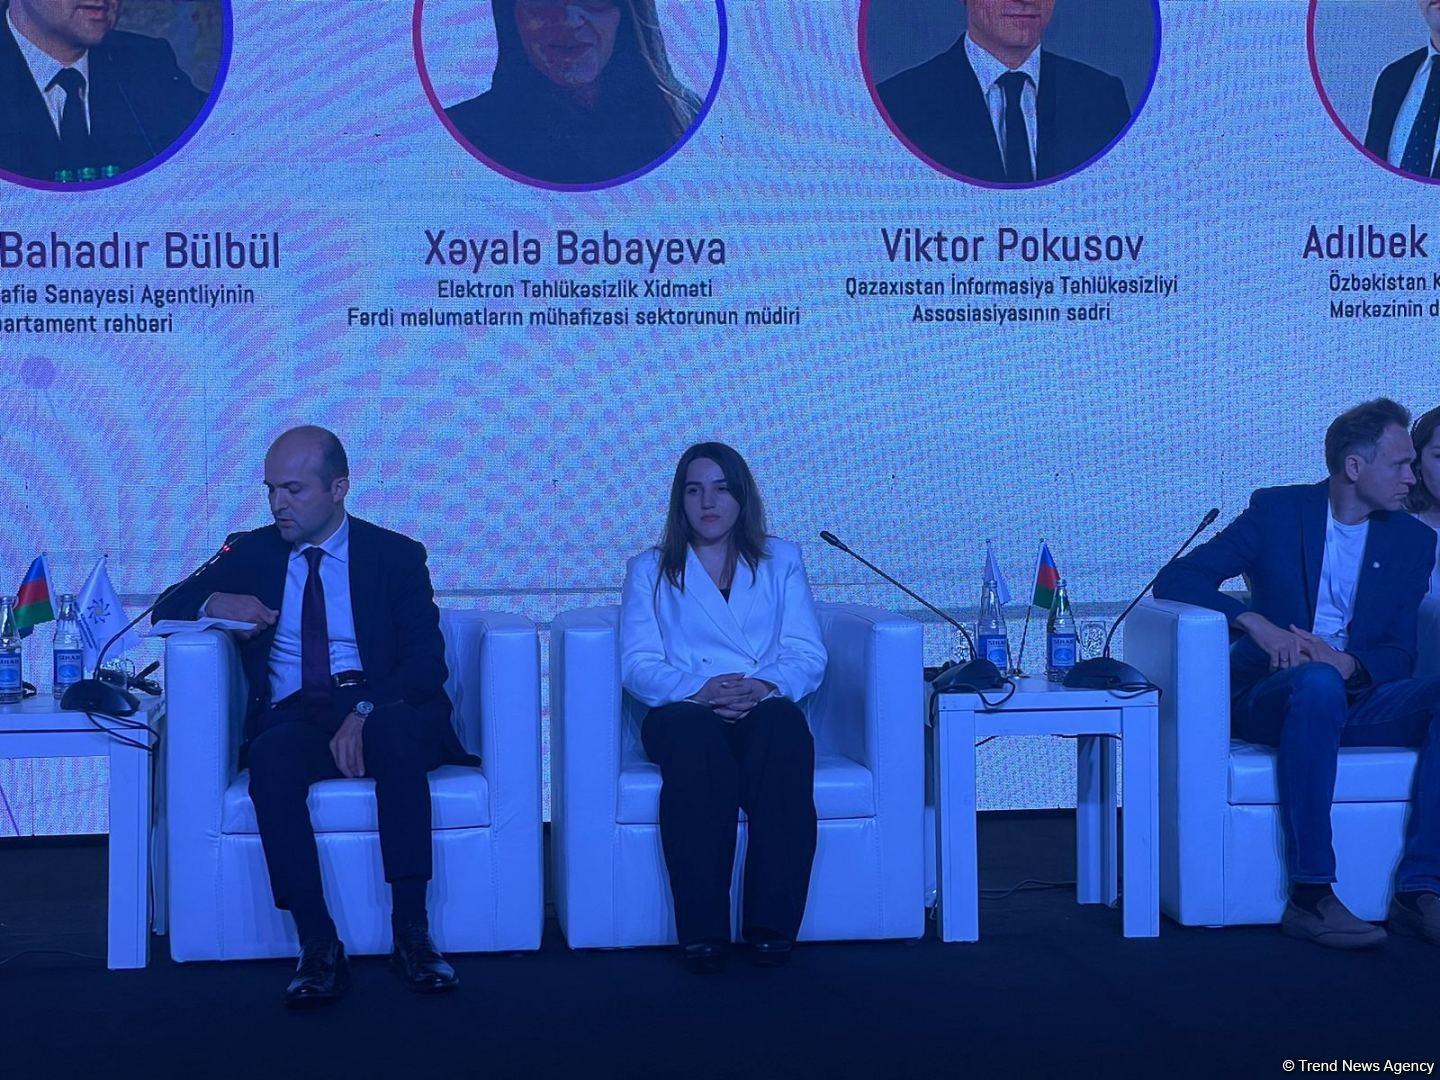 Ensuring cybersecurity and protection of personal data in Azerbaijan is priority - official